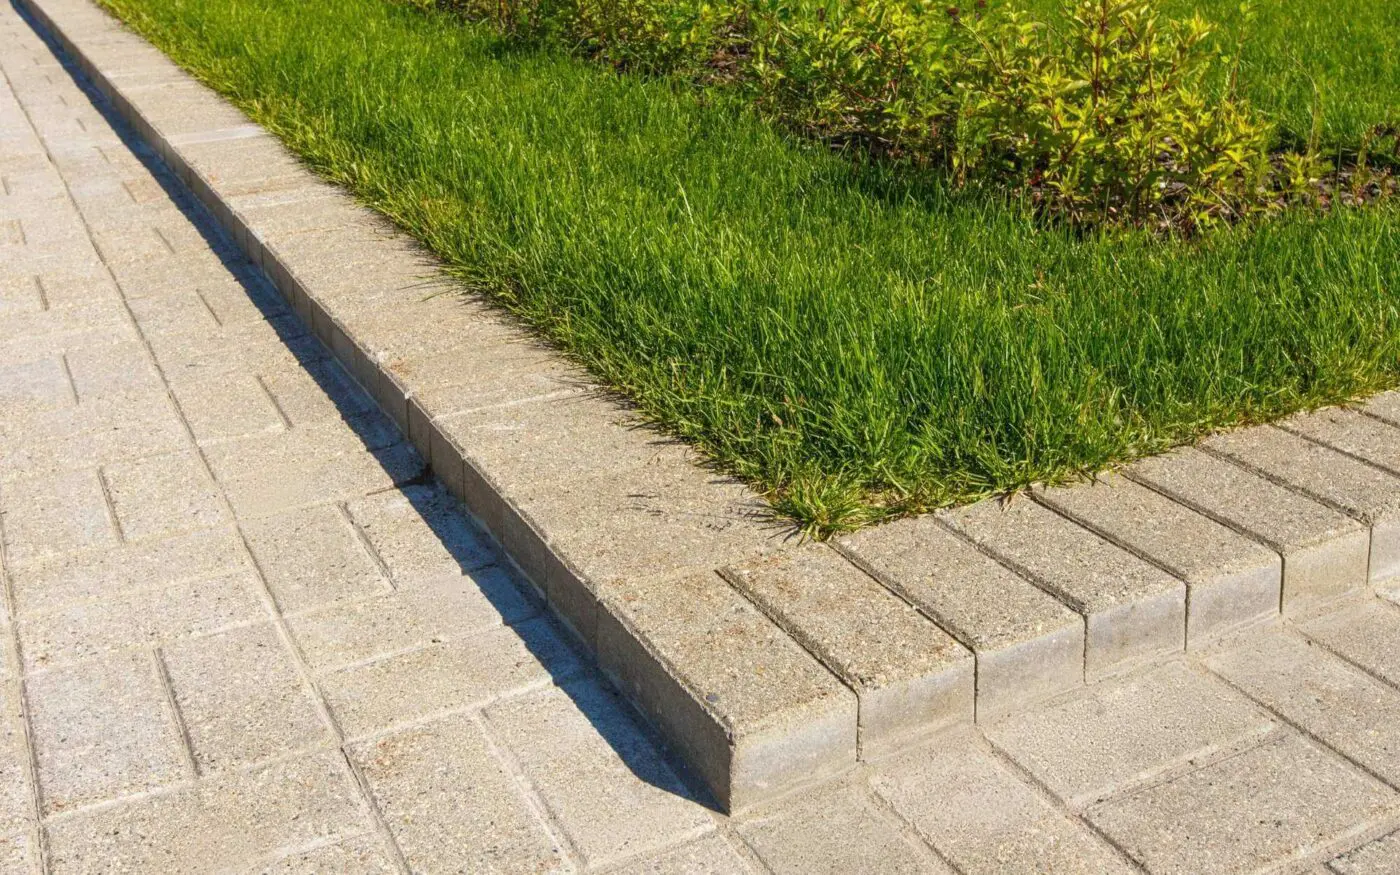 concrete curb separating the pavement from the grass